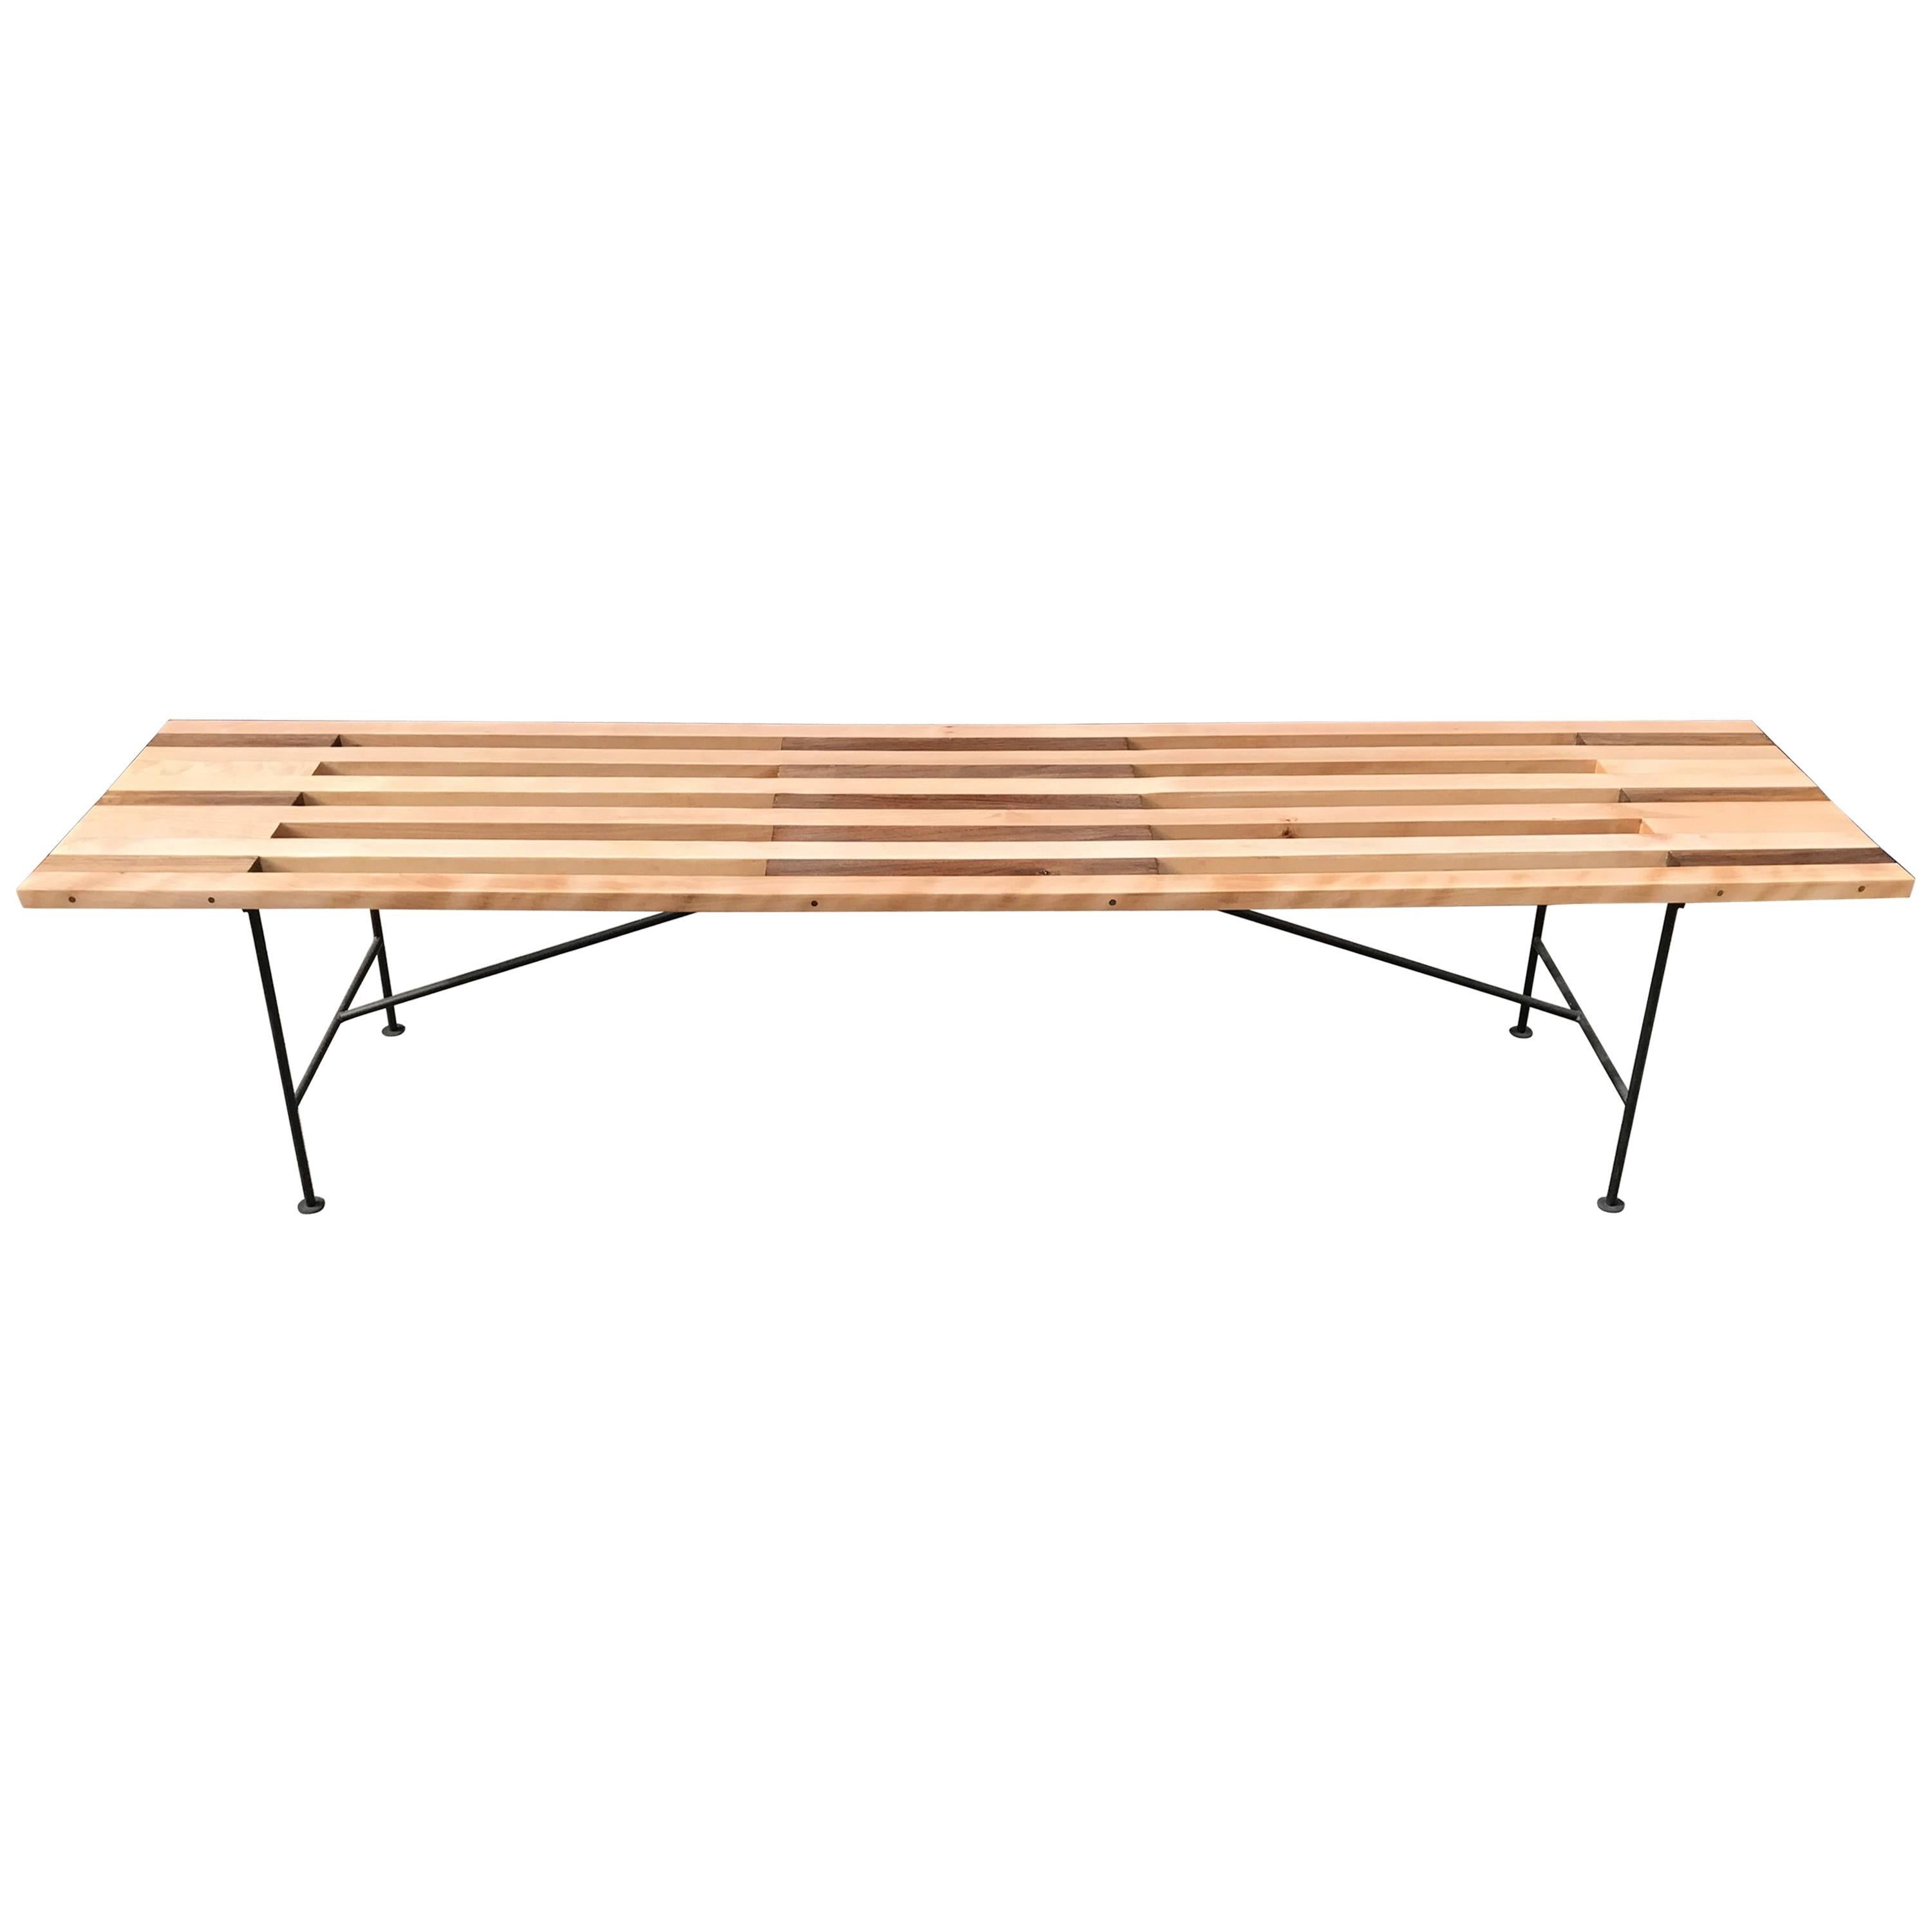 Custom Slat Bench or Coffee Table For Sale